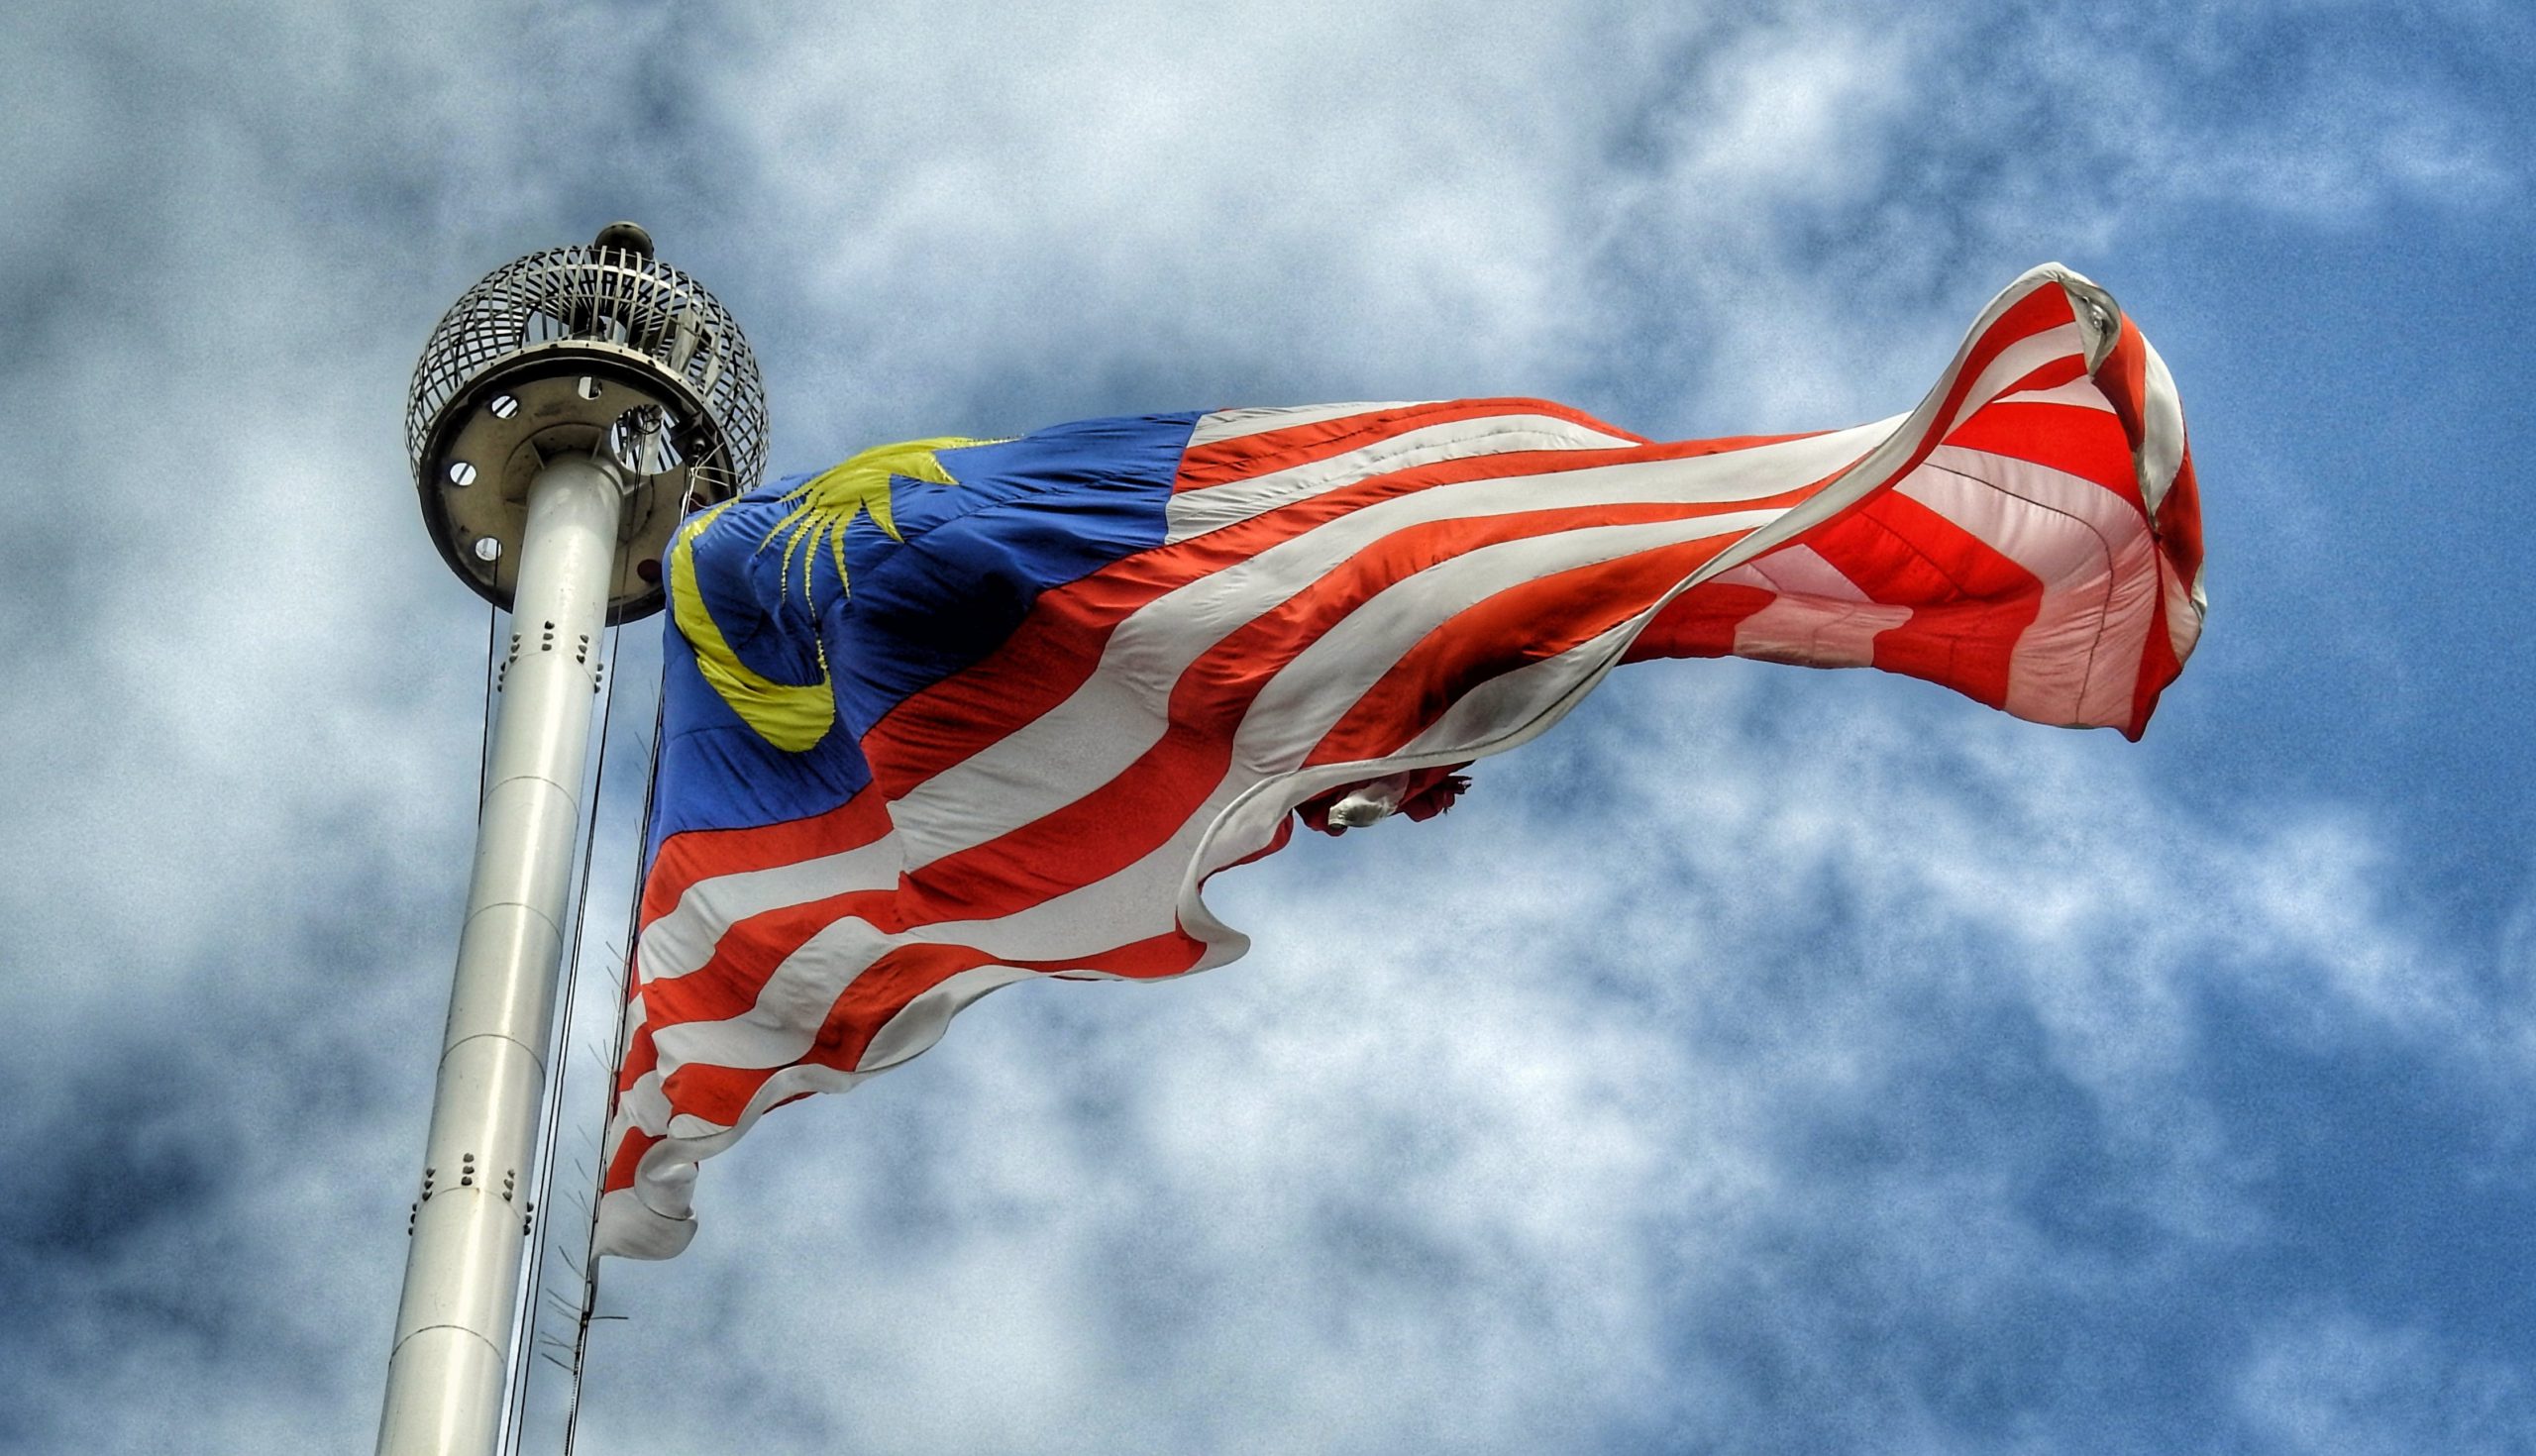 More than 50 conglomerates and upstarts vie for digital banking licenses in Malaysia